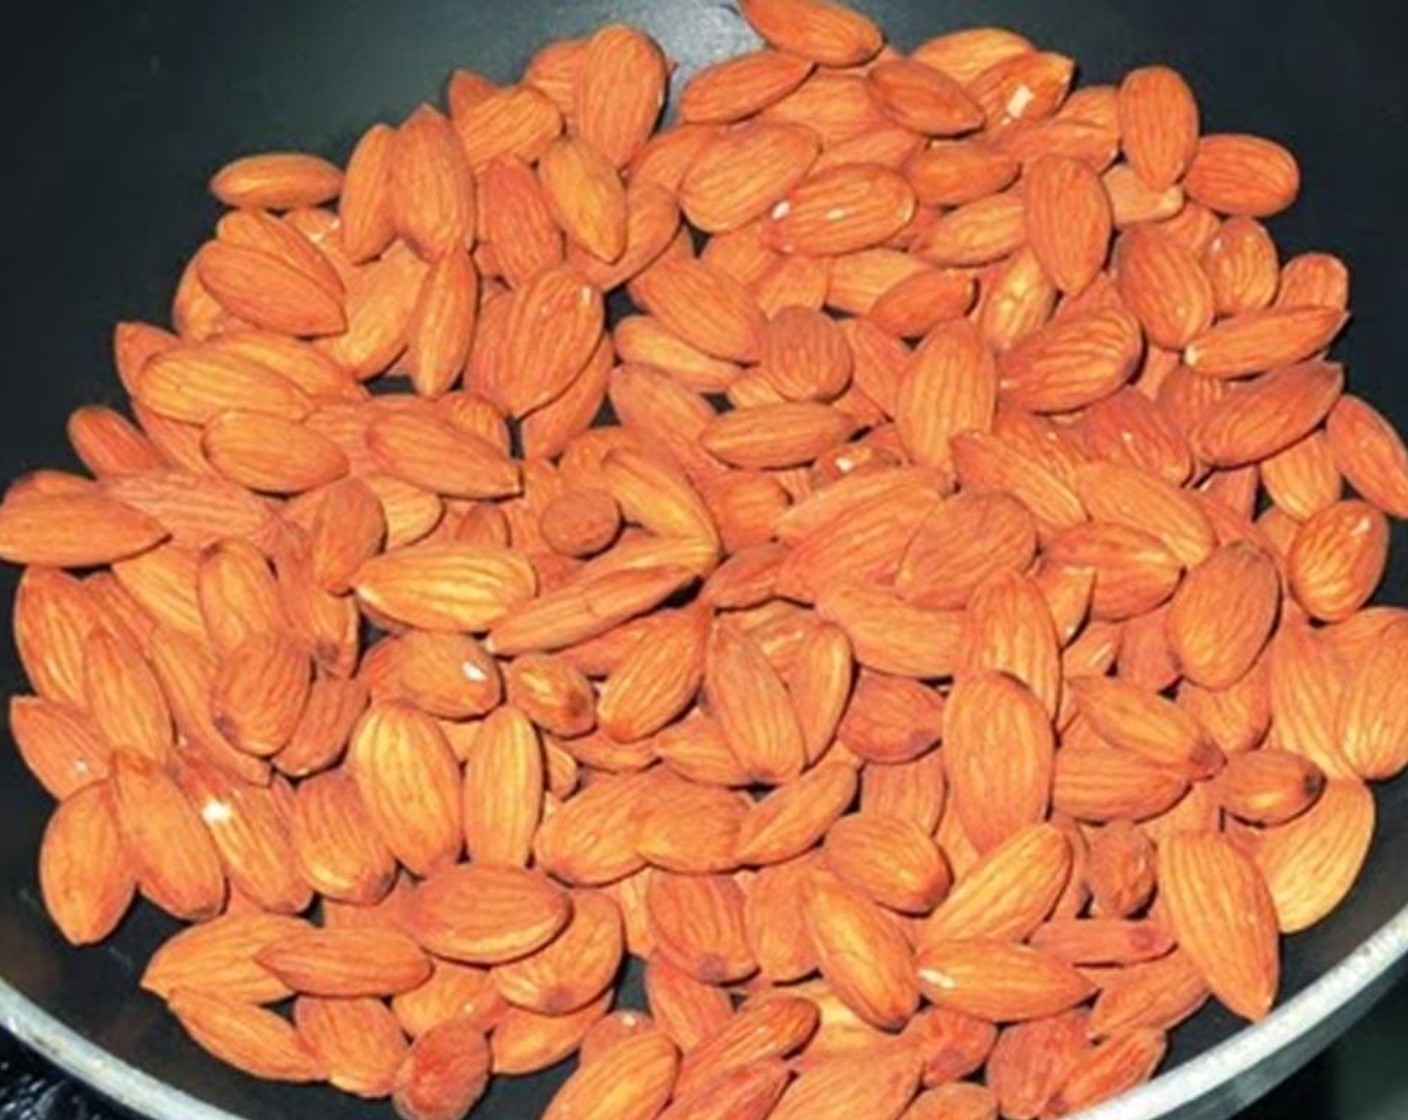 step 1 Roast Almonds (1 cup) in a skillet for 4-5 minutes or until you get an aroma from them.